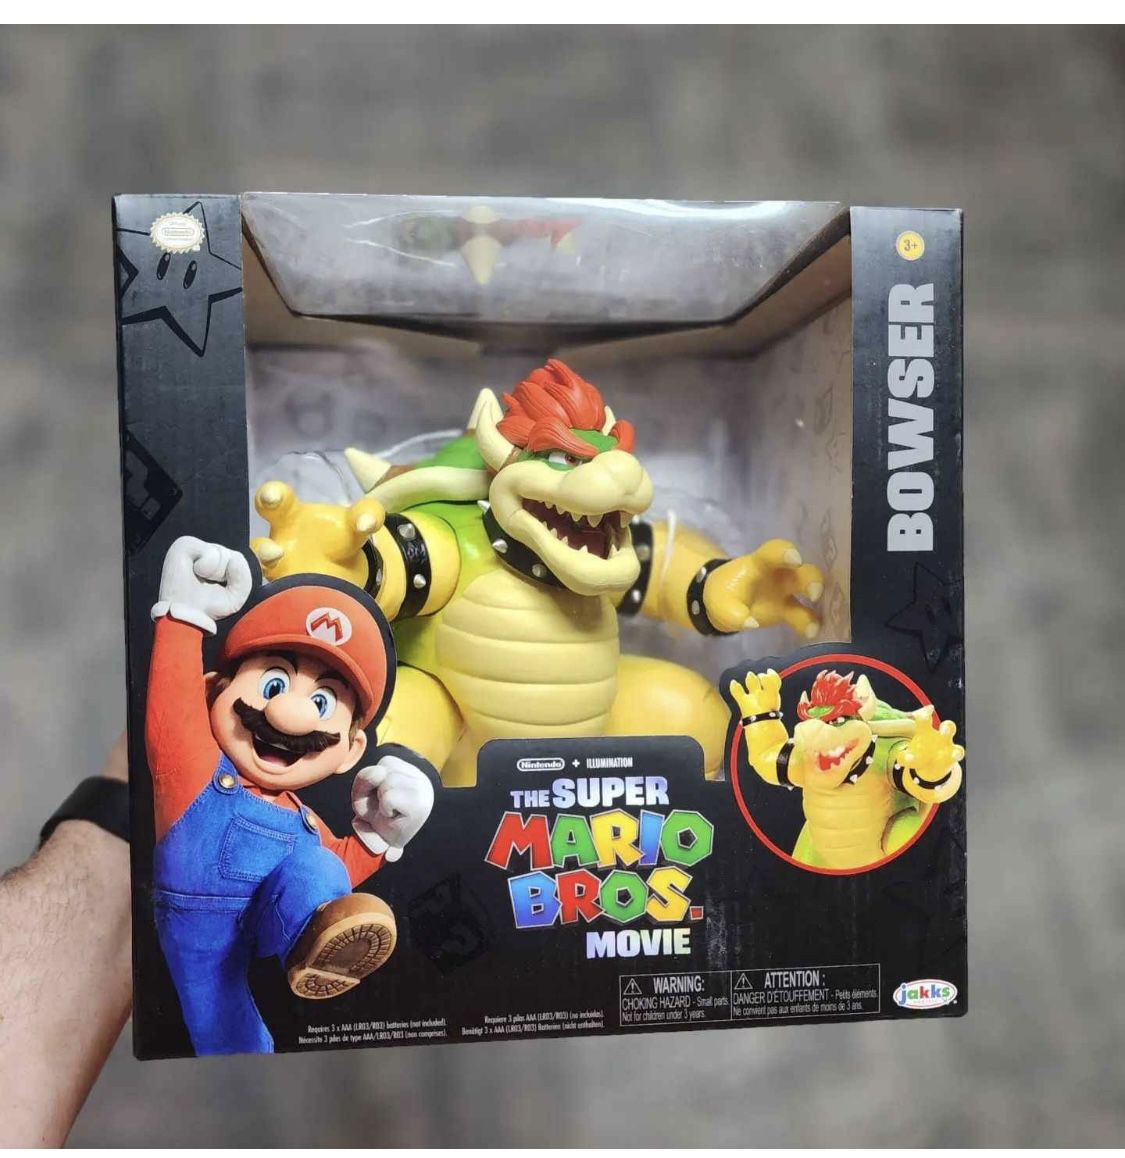 Nintendo the super mario bros movie Bowser figure wuth fire breathing effect